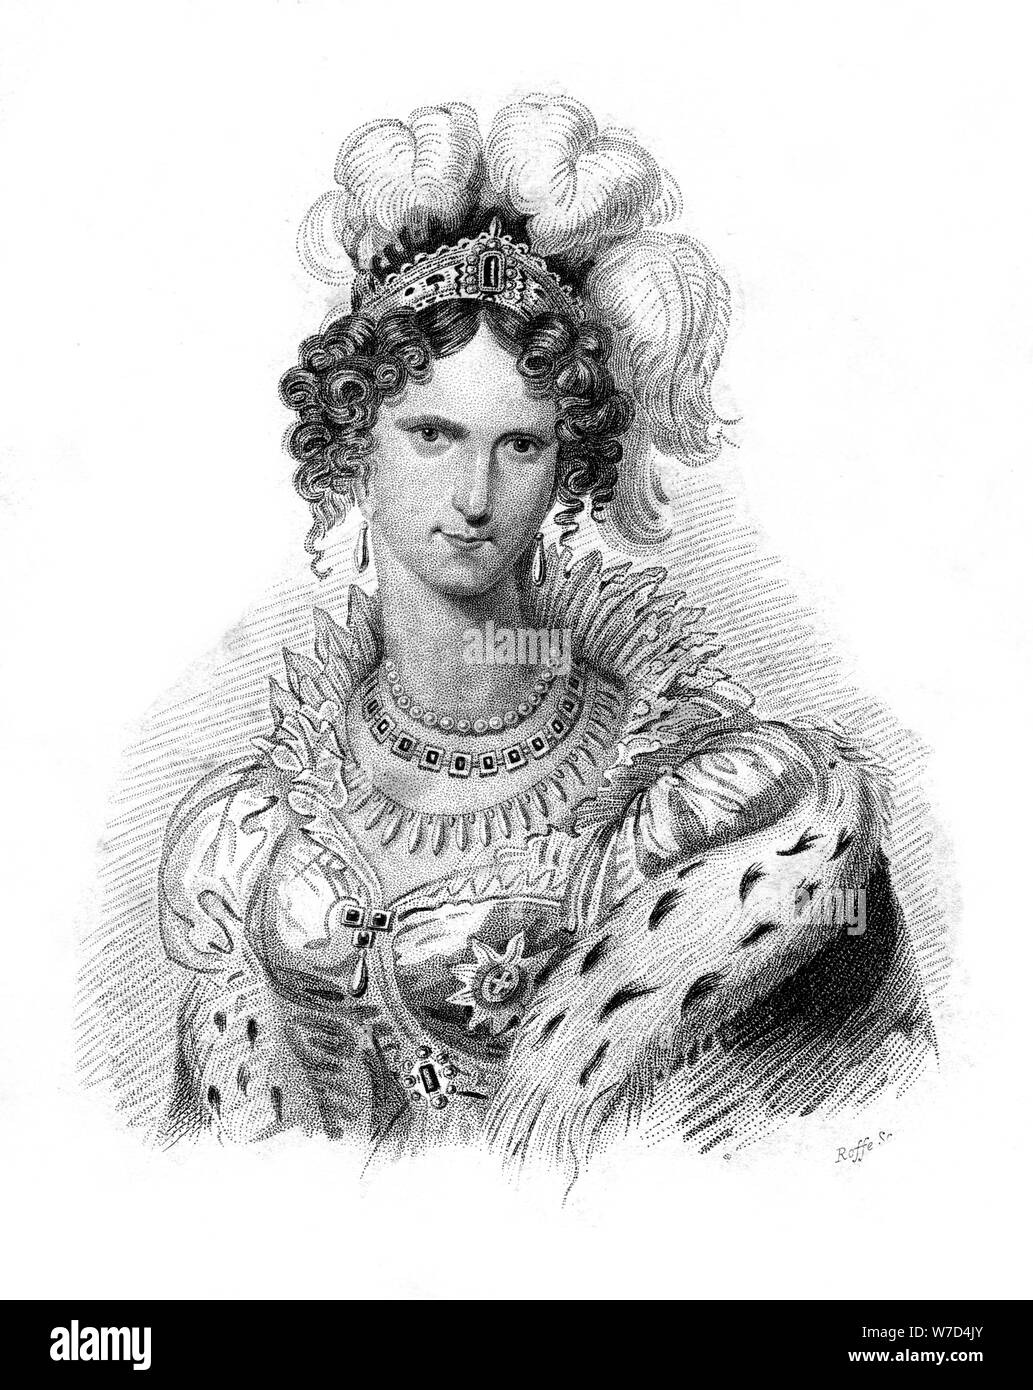 Queen Adelaide, queen consort of King William IV, 19th century.Artist: Roffe Stock Photo